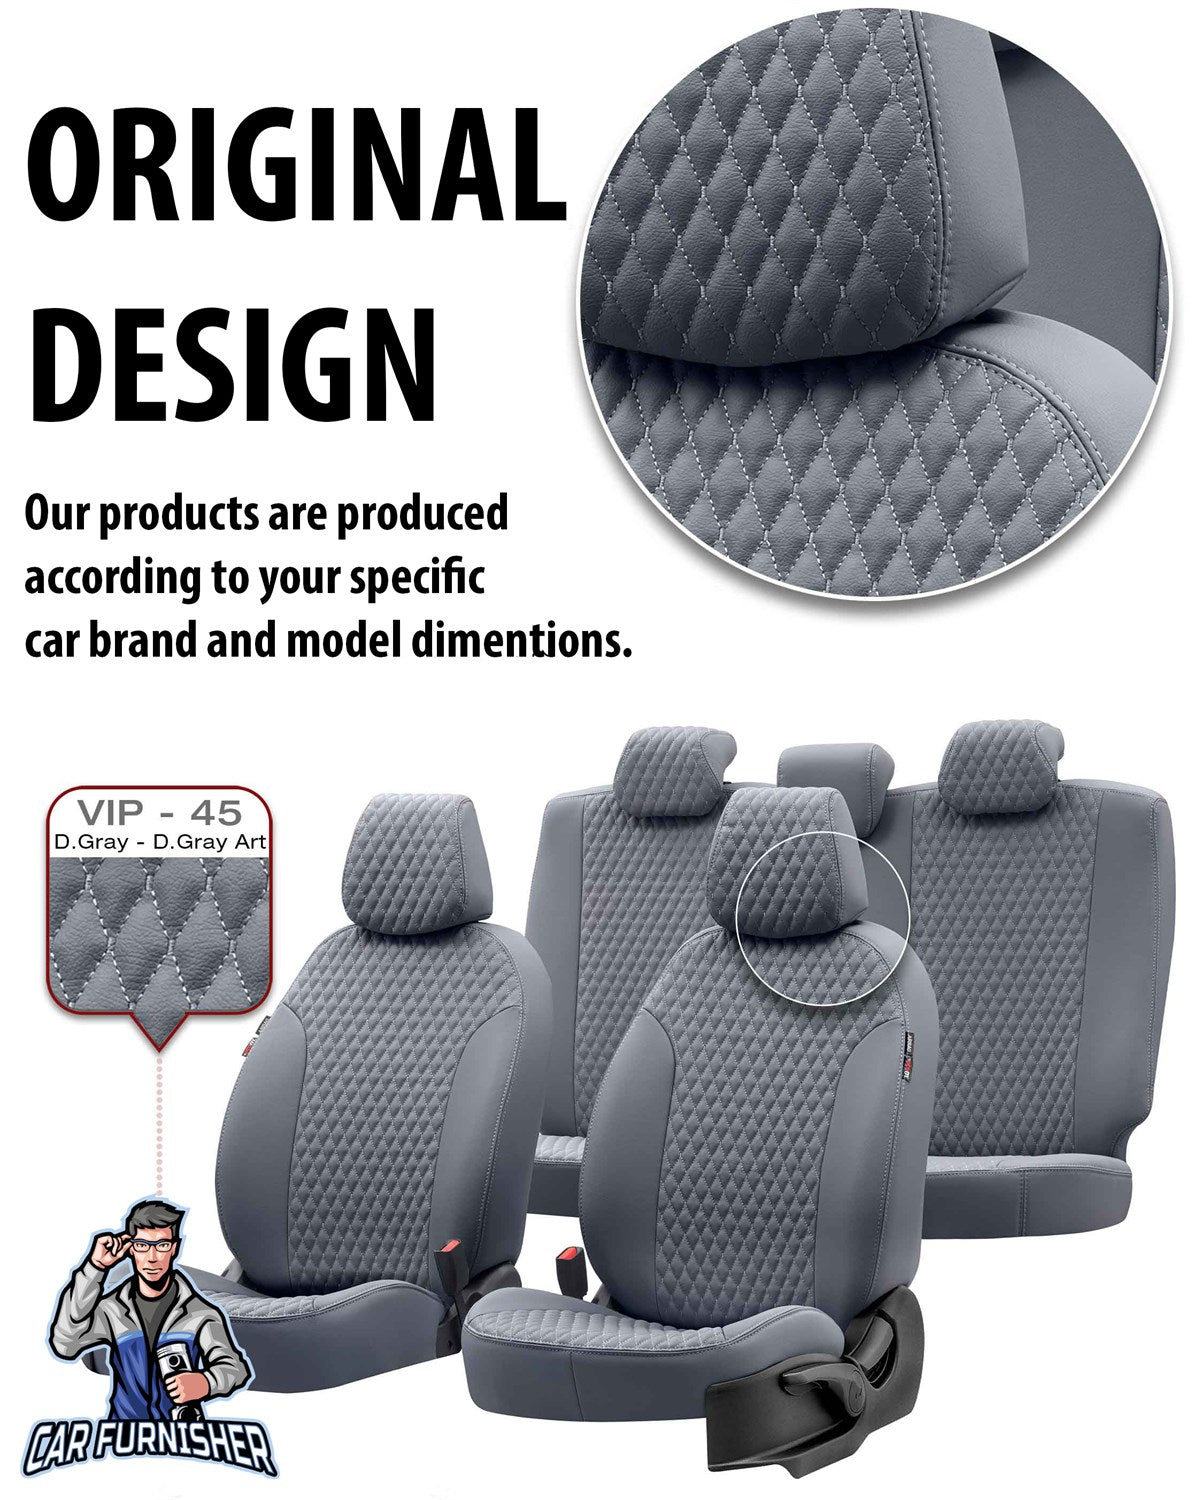 Renault Zoe Seat Covers Amsterdam Leather Design Black Leather